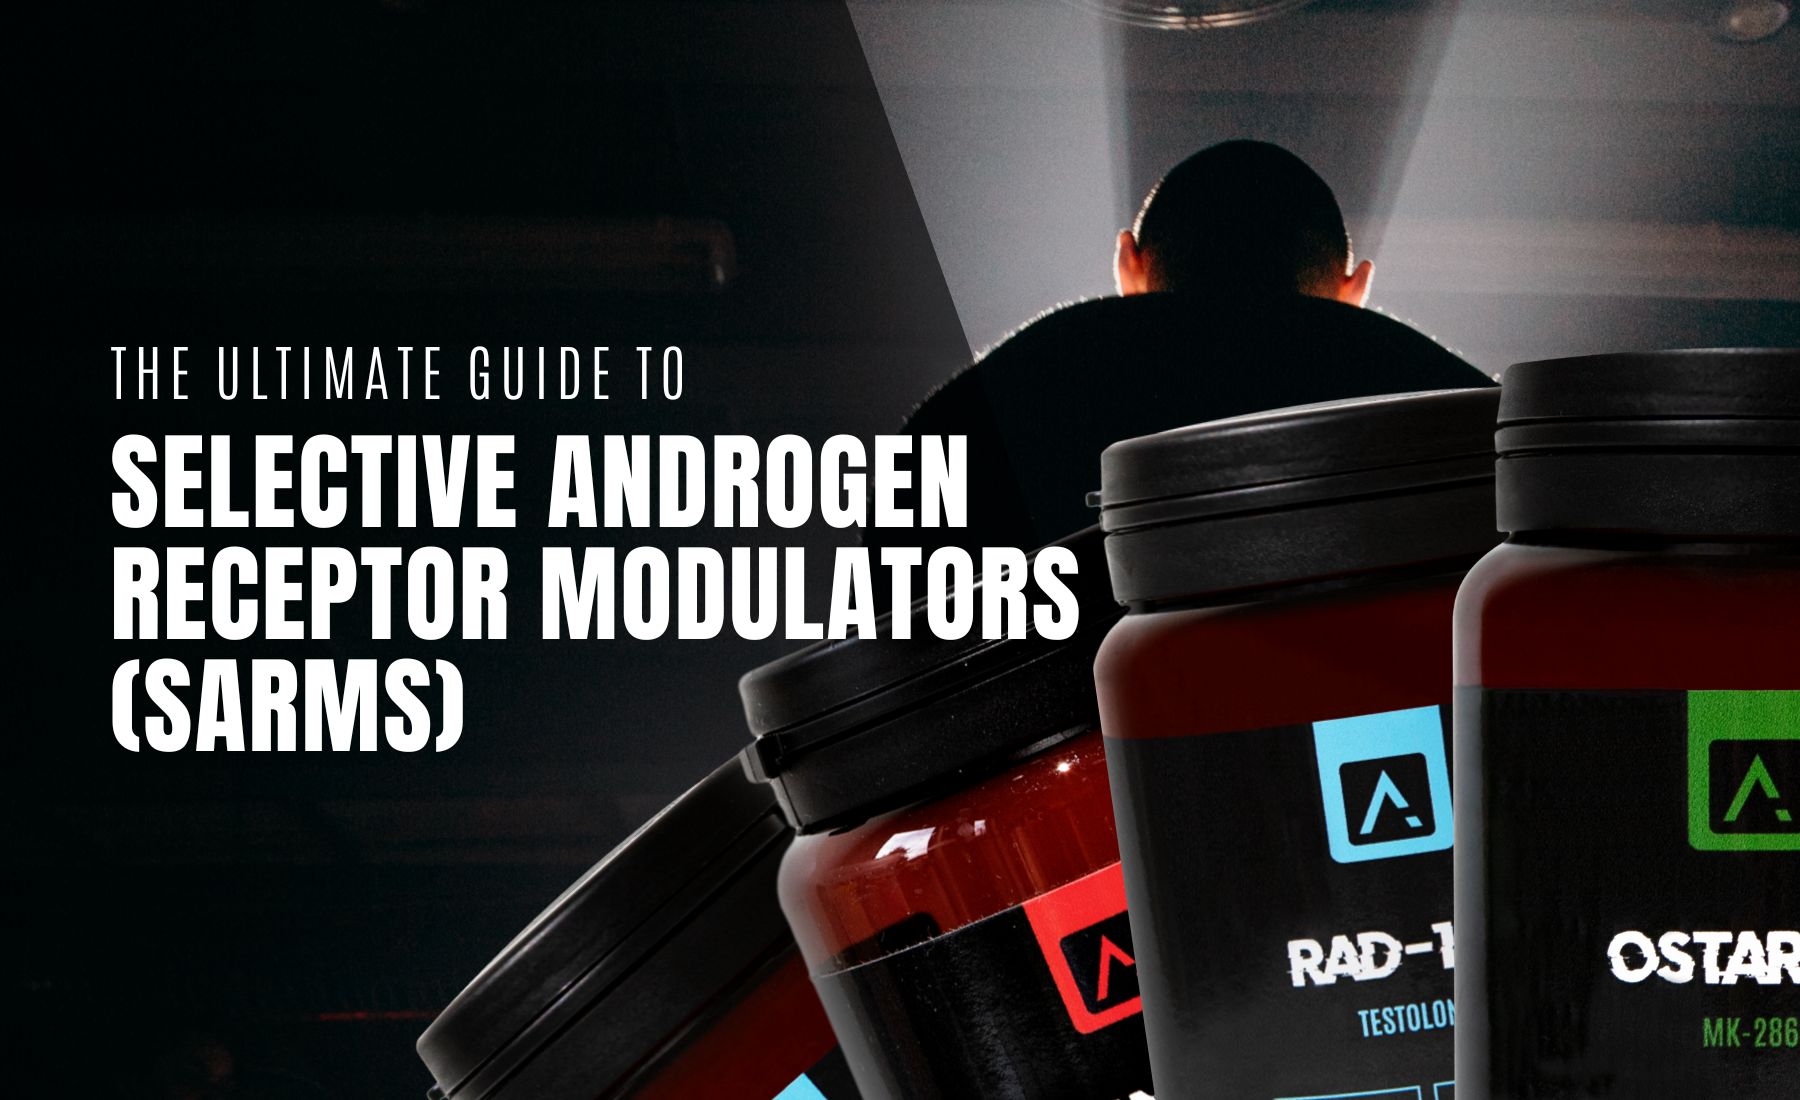 The Ultimate Guide To Selective Androgen Receptor Modulators (SARMs)